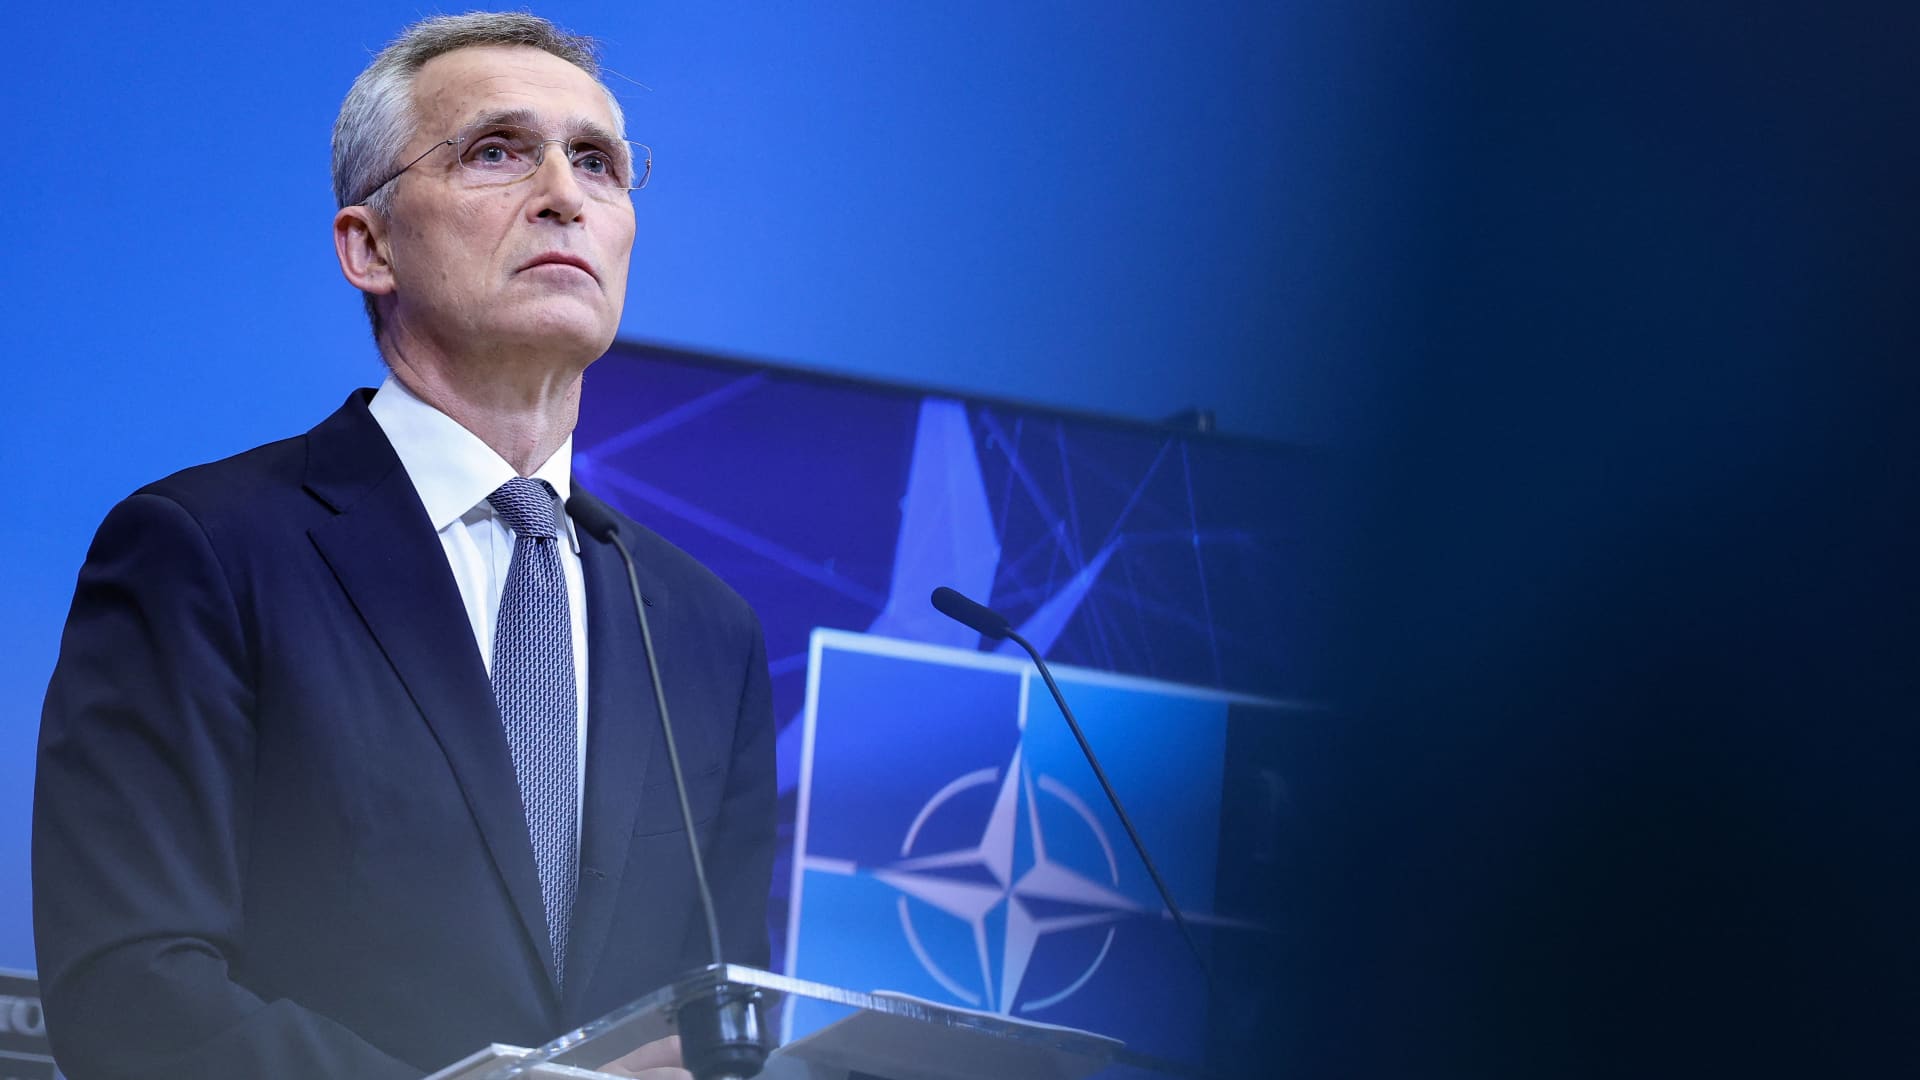 NATO Secretary General Jens Stoltenberg speaks during a press conference ahead of the alliance's Defence Ministers' meeting at the NATO headquarters in Brussels on March 15, 2022.